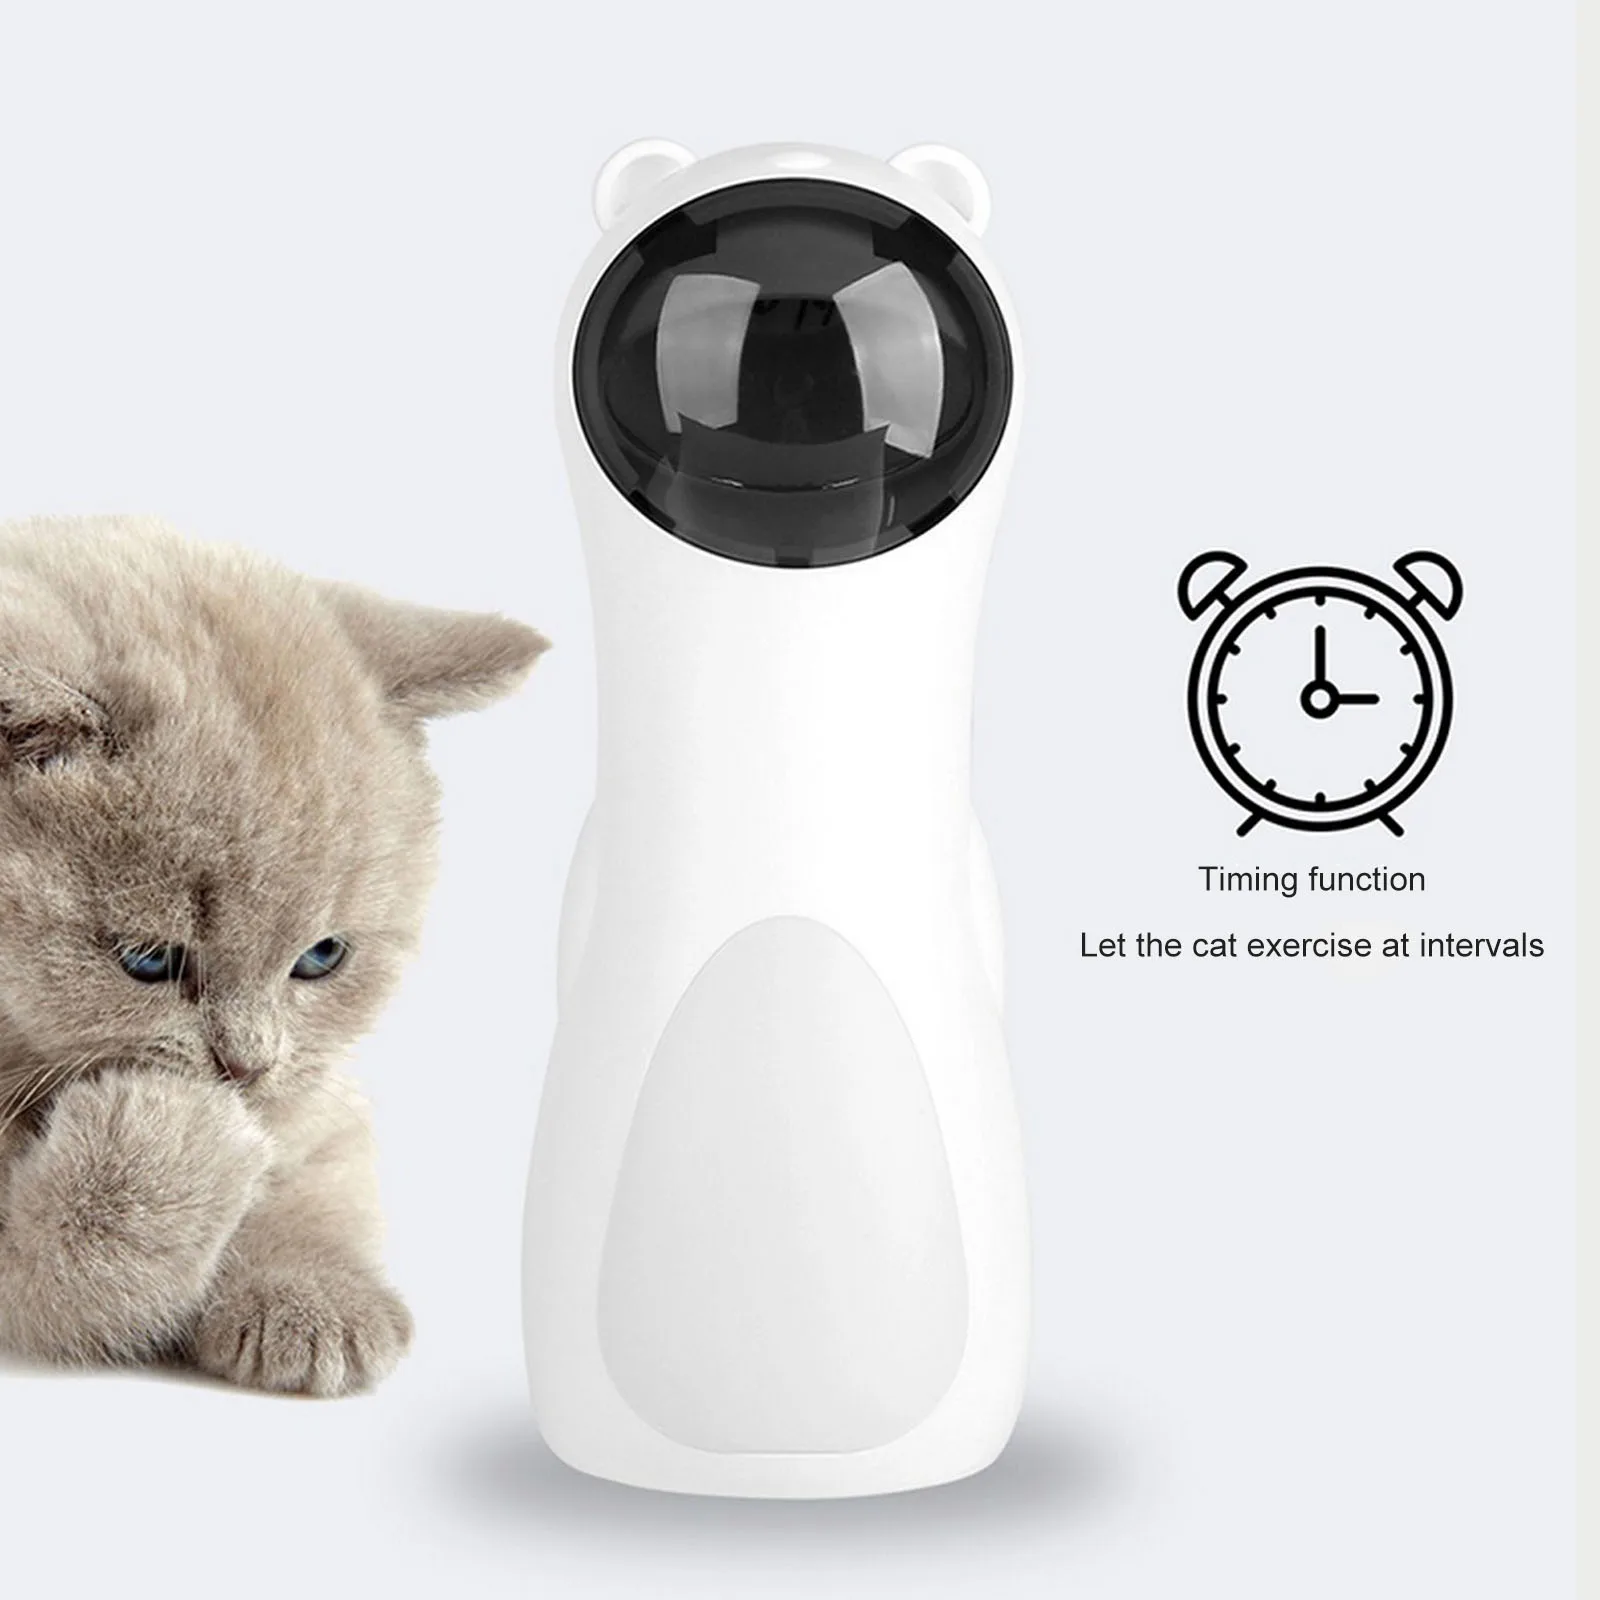 

Cat Laser Toy Automatic Kitten/Dog Interactive Toy Funny Handheld Mode Portable Cats Dog Laser Pointer Pet Teasing Smart Toys